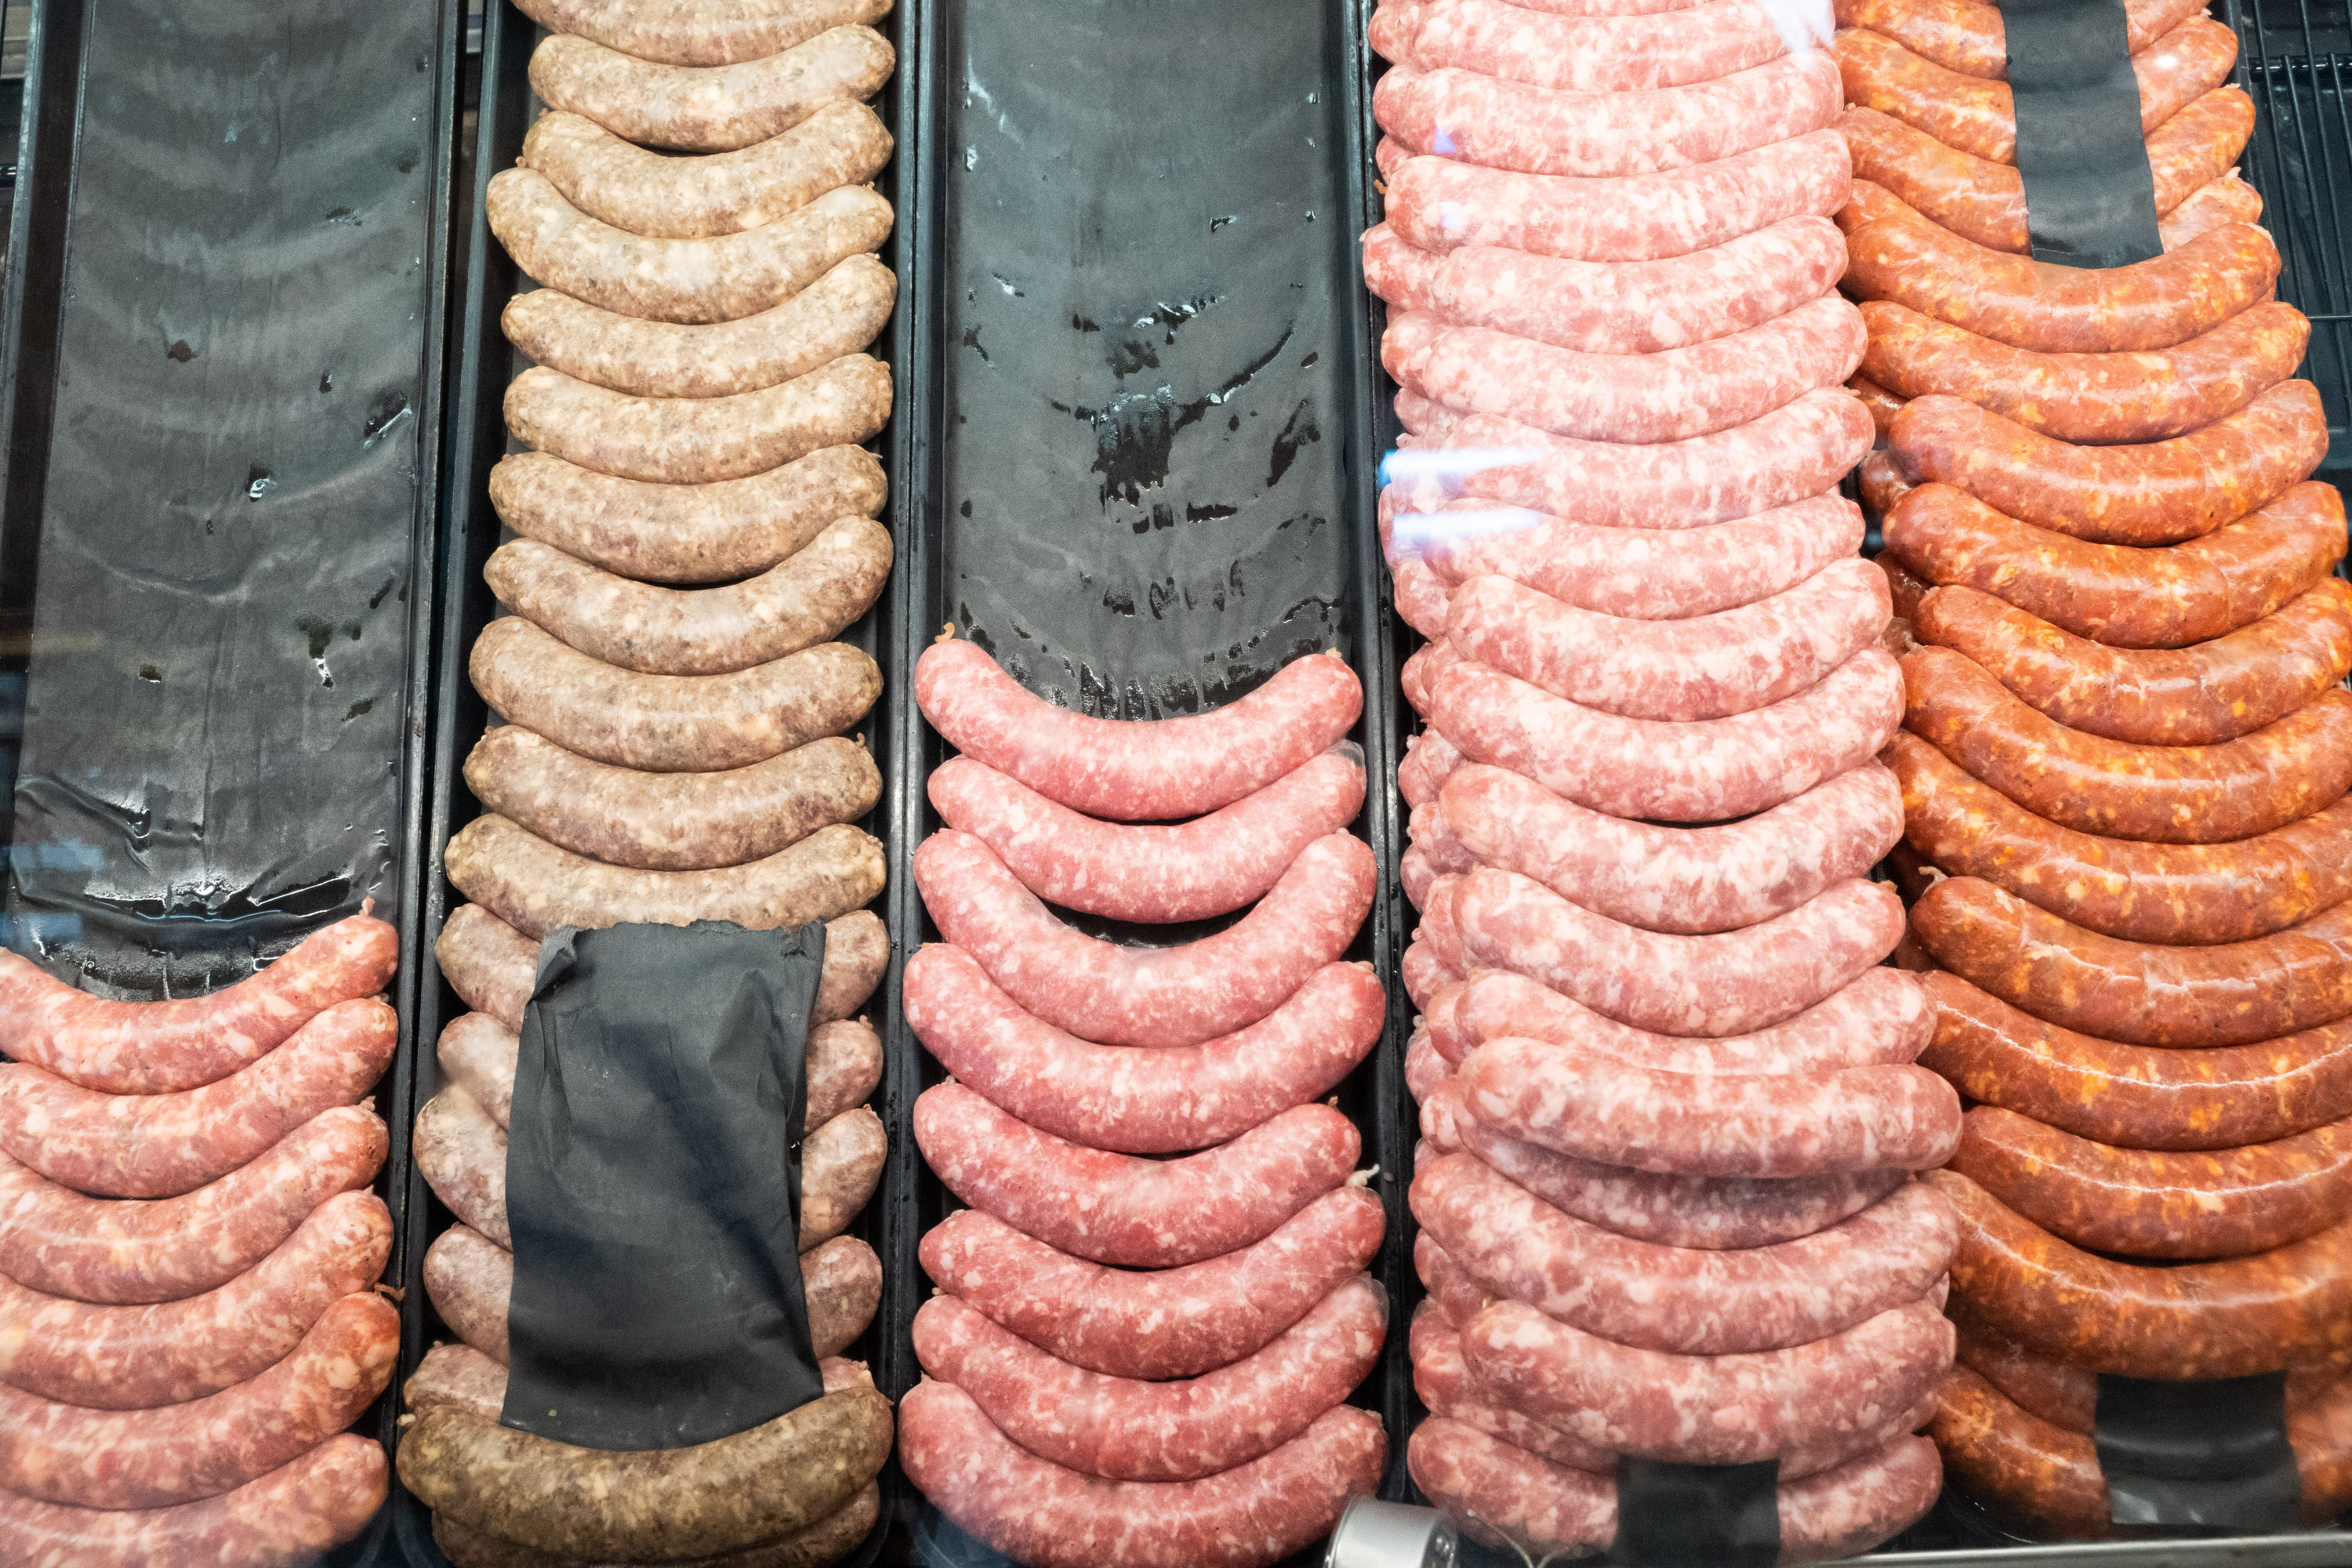 Jimmy P’s makes its own smoked andouille, bratwurst, blood sausage, lamb merguez and more.